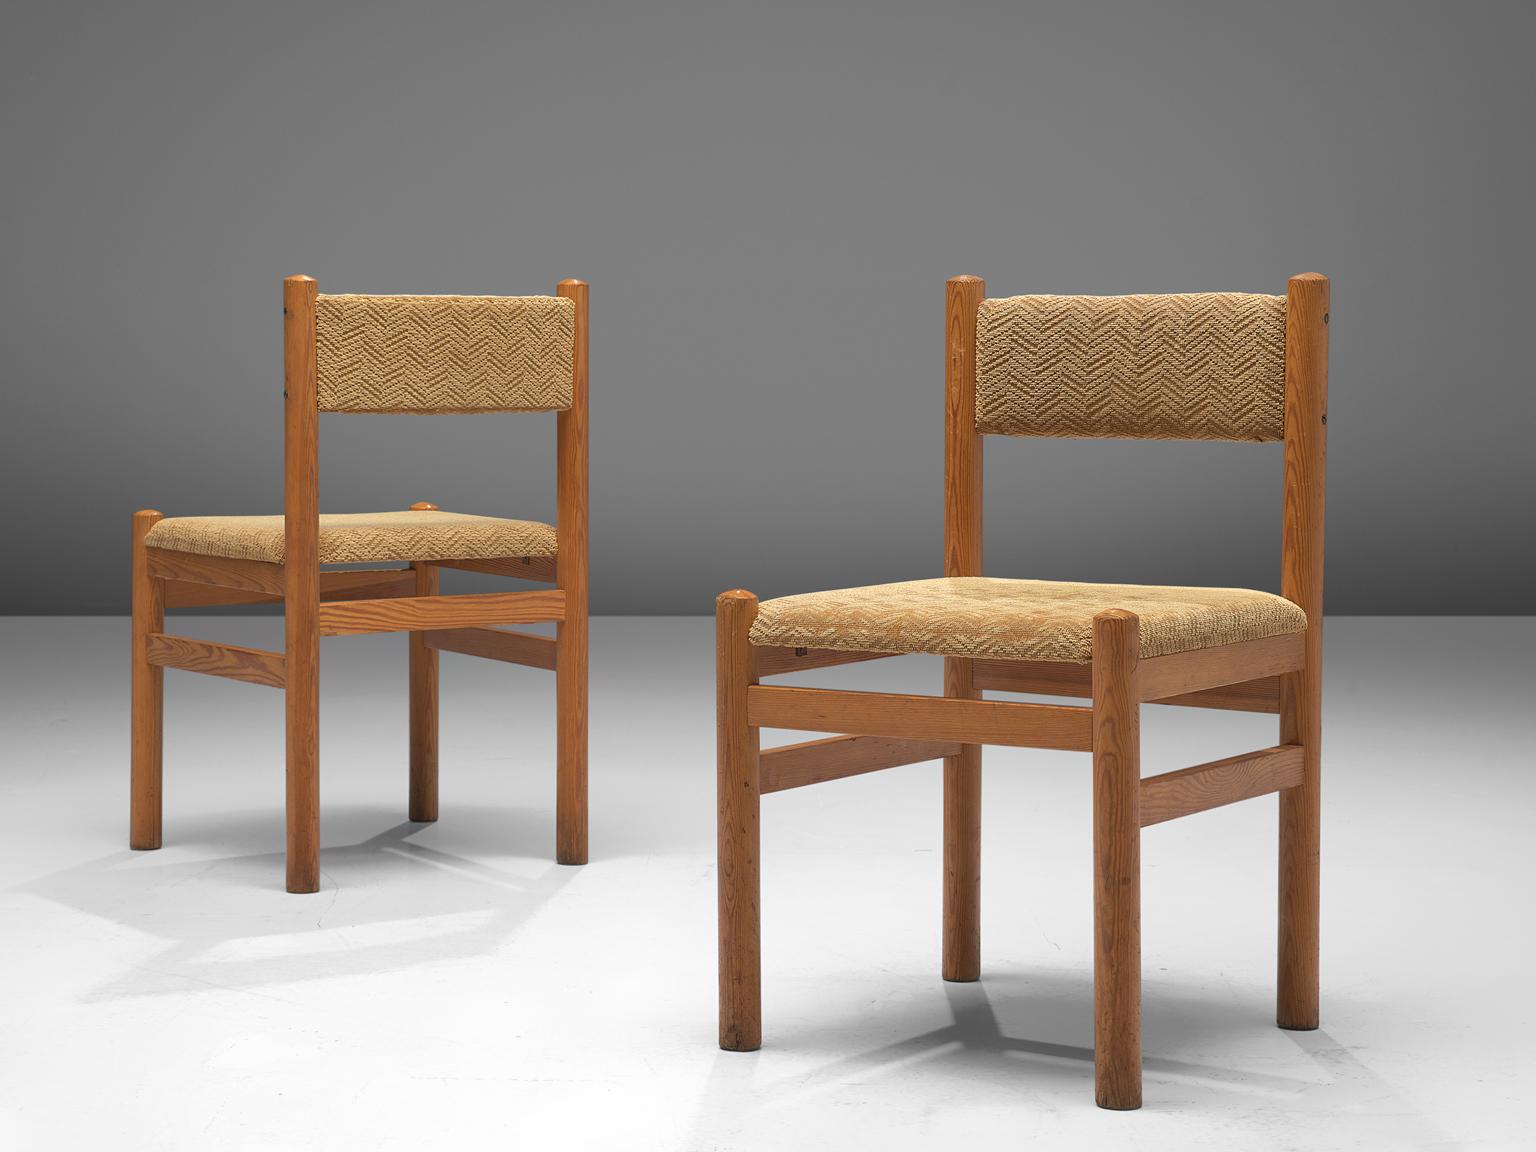 European Set of Twelve Dining Chairs in Pine and Beige Upholstery, 1950s